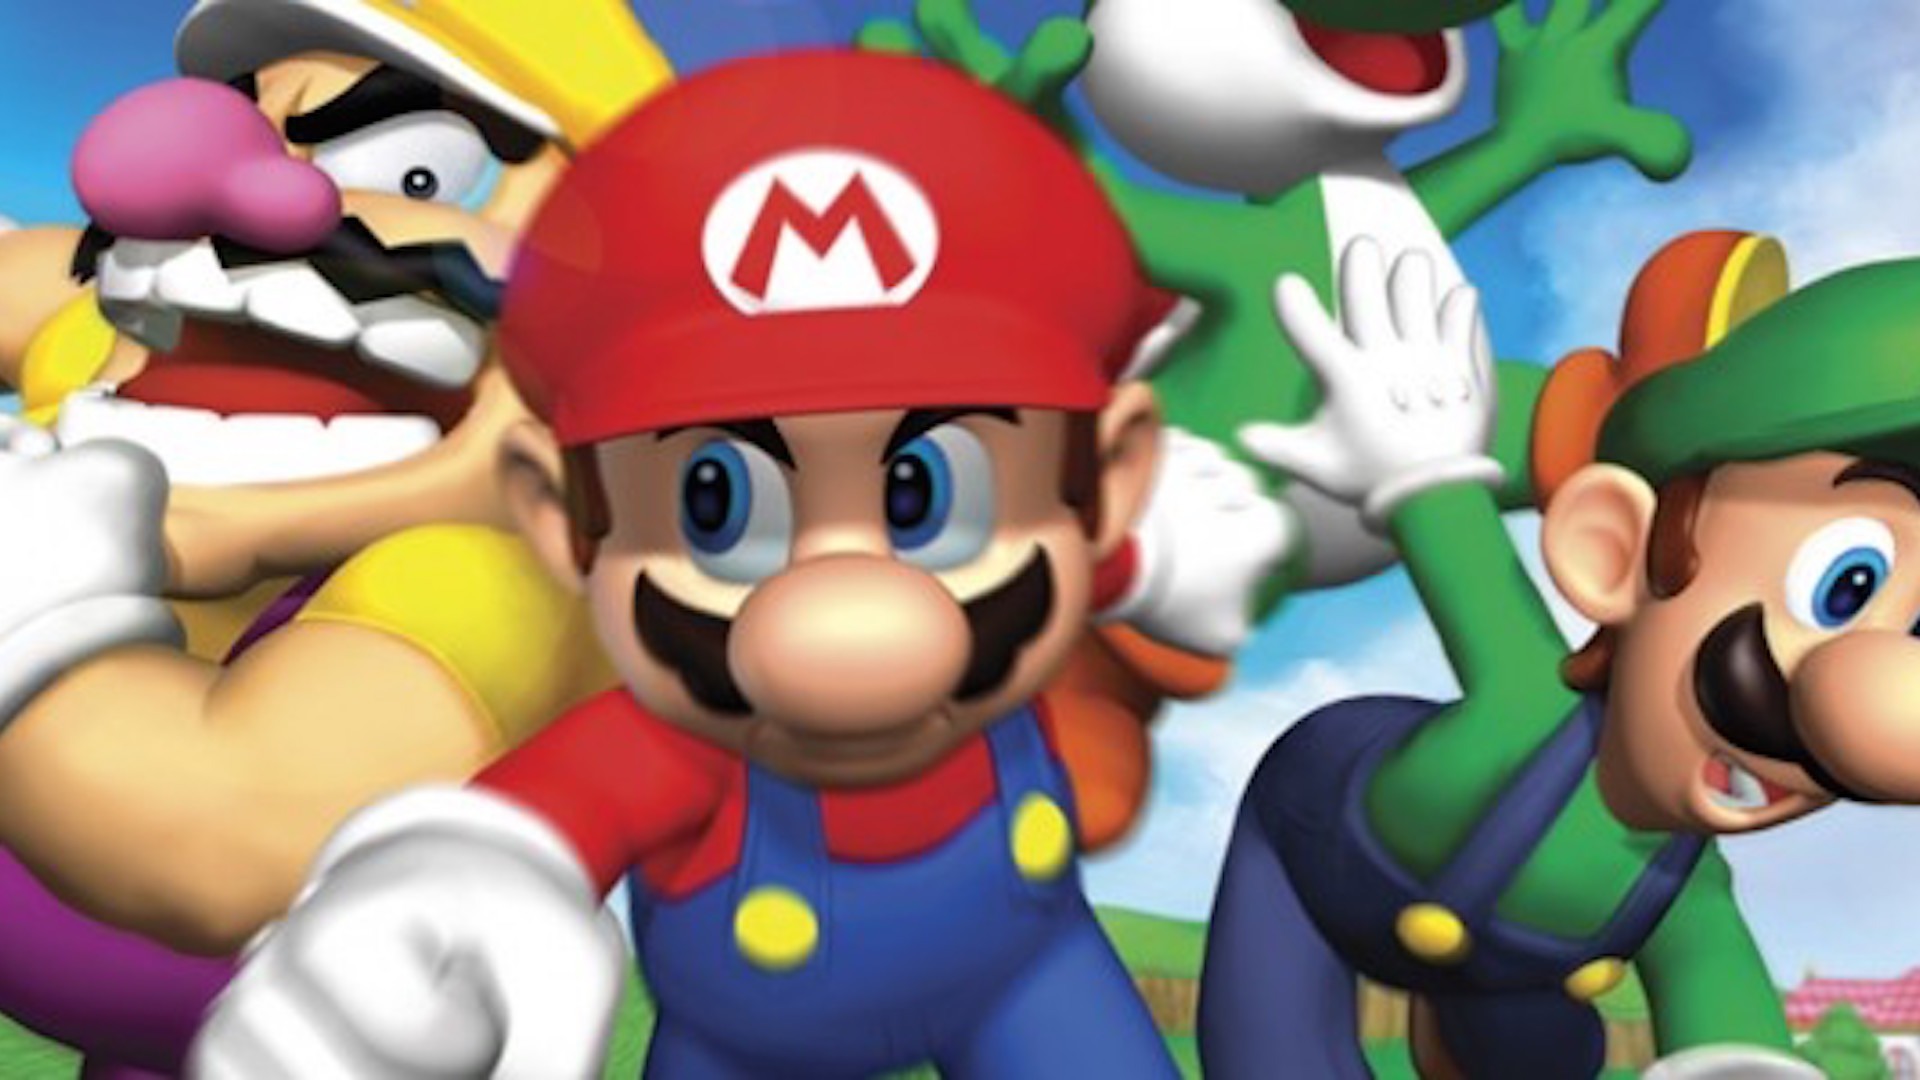 Super Mario 64 Ds Backgrounds on Wallpapers Vista